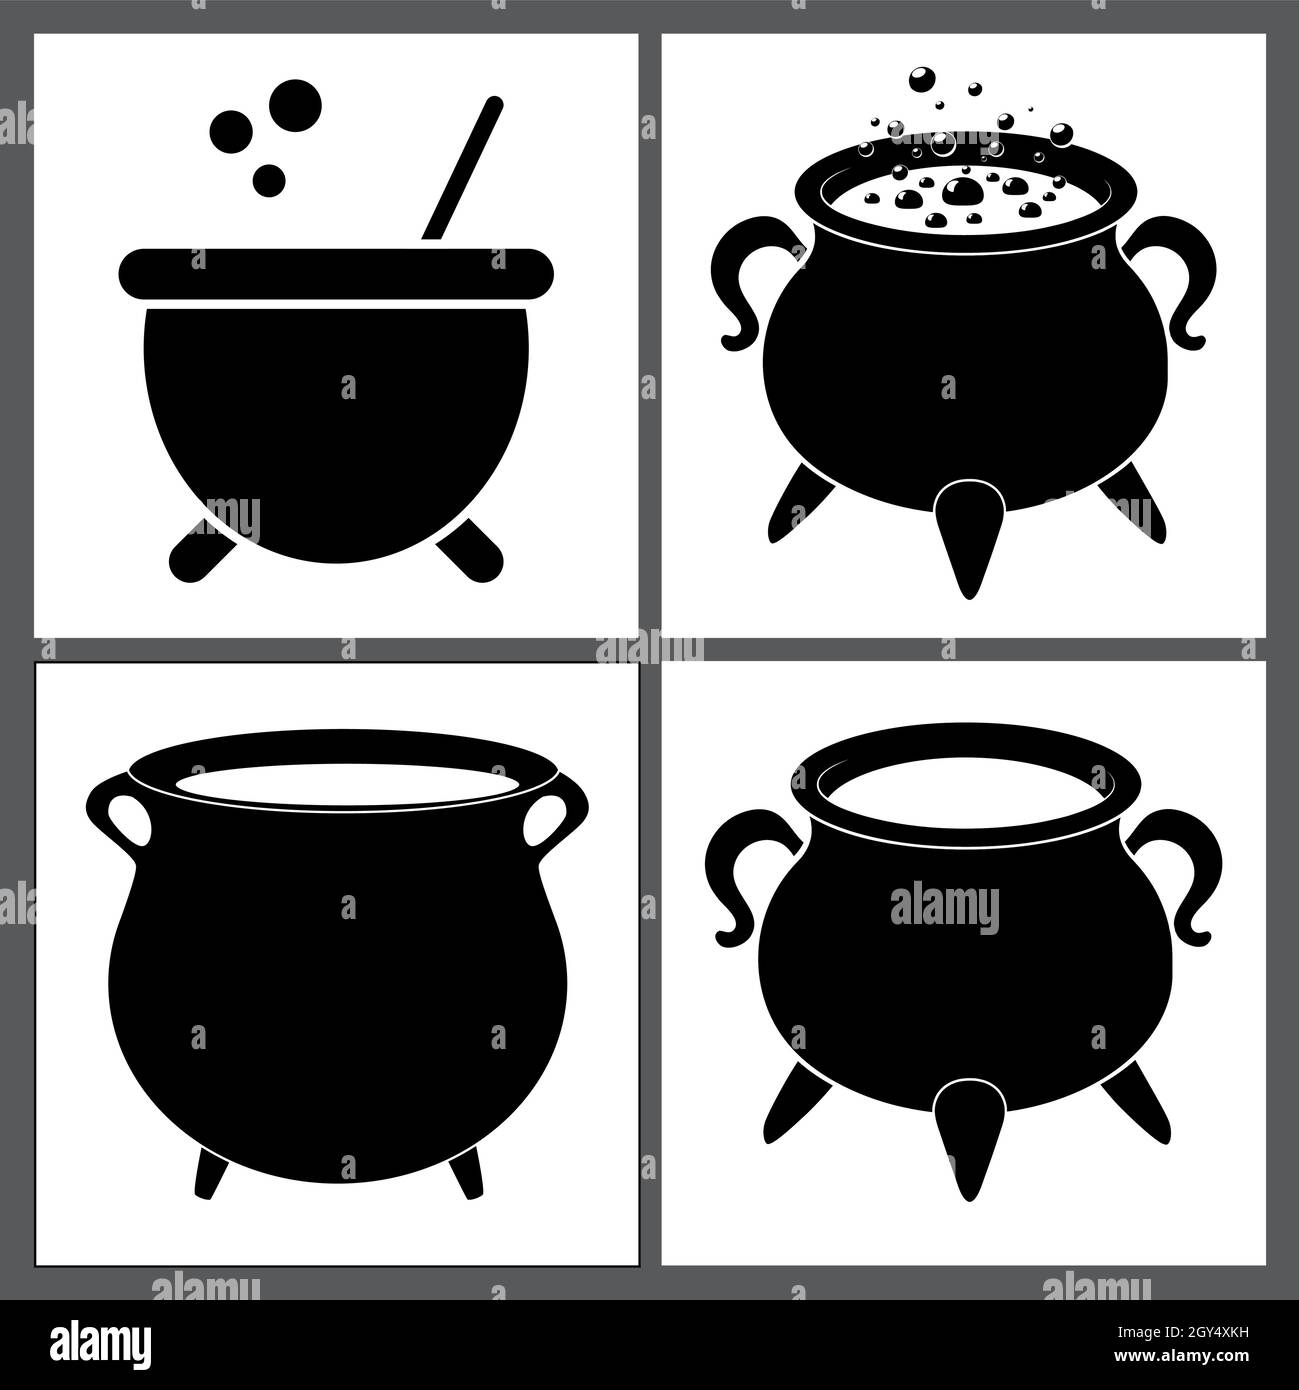 Cauldron with  magic potion and empty pot. Silhouette halloween icon set. Vector illustration with black shapes isolated on white background. Stock Vector